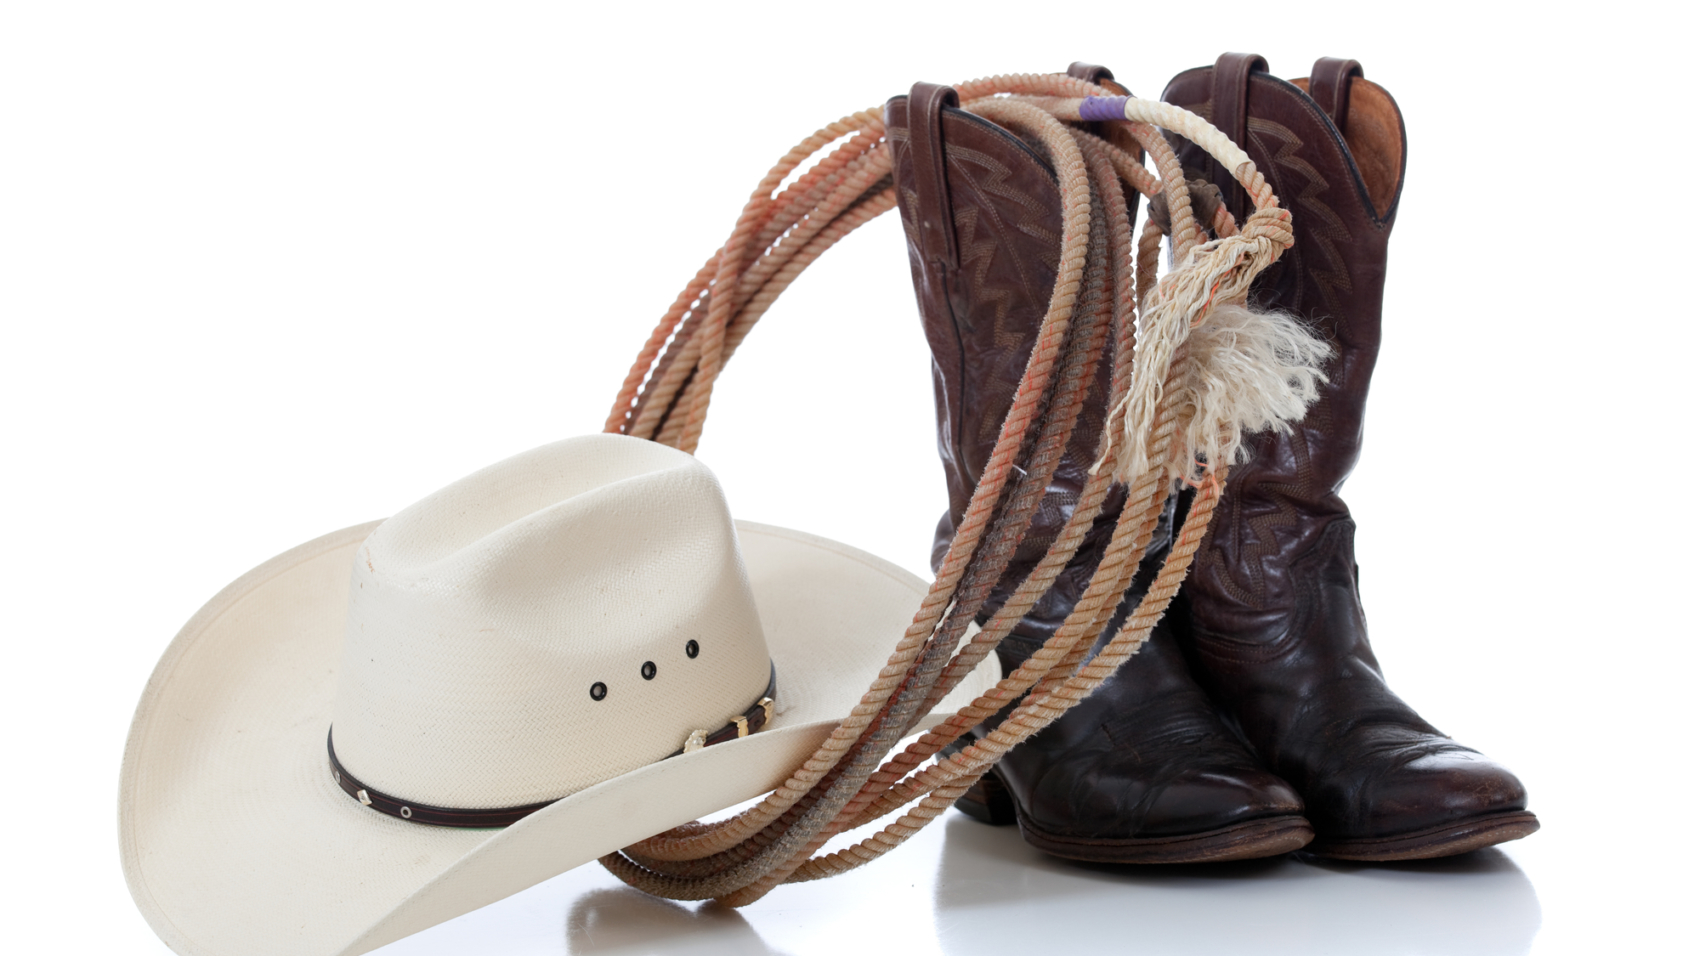 A white cowboy hat, brown leather boots and lariat on a white background